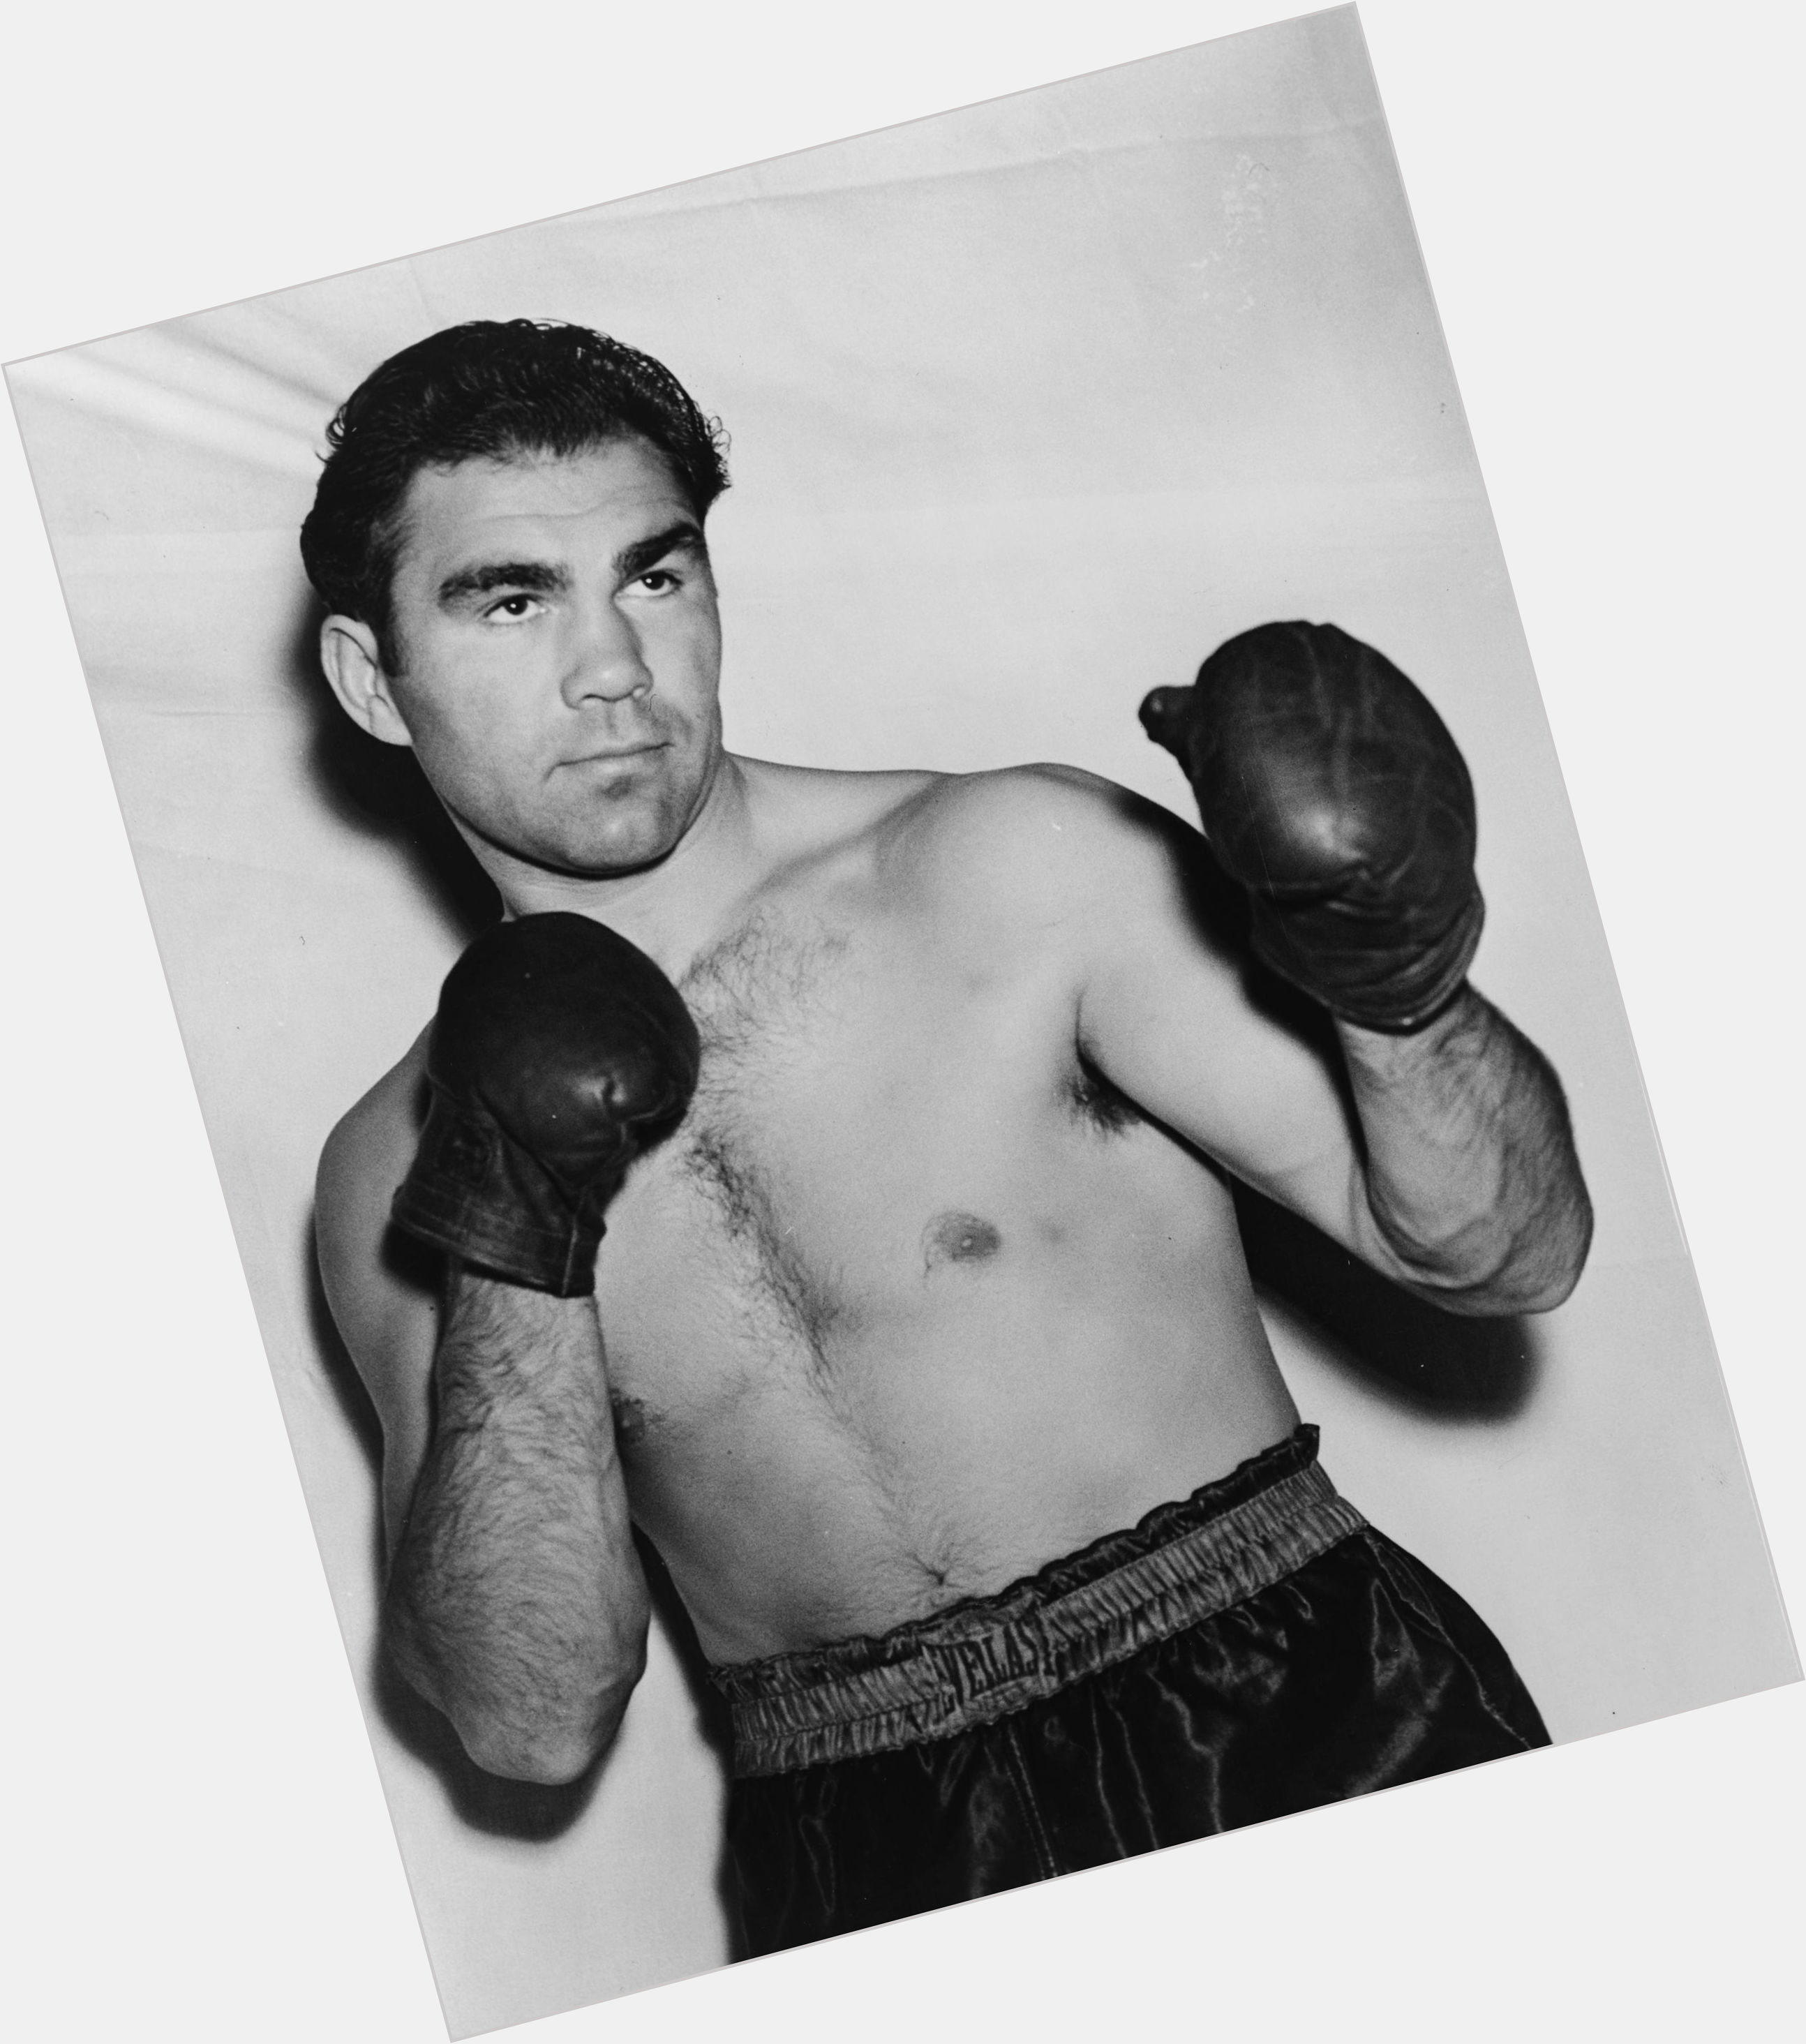 <a href="/hot-men/max-schmeling/is-he-still-alive-where-buried">Max Schmeling</a> Large body,  